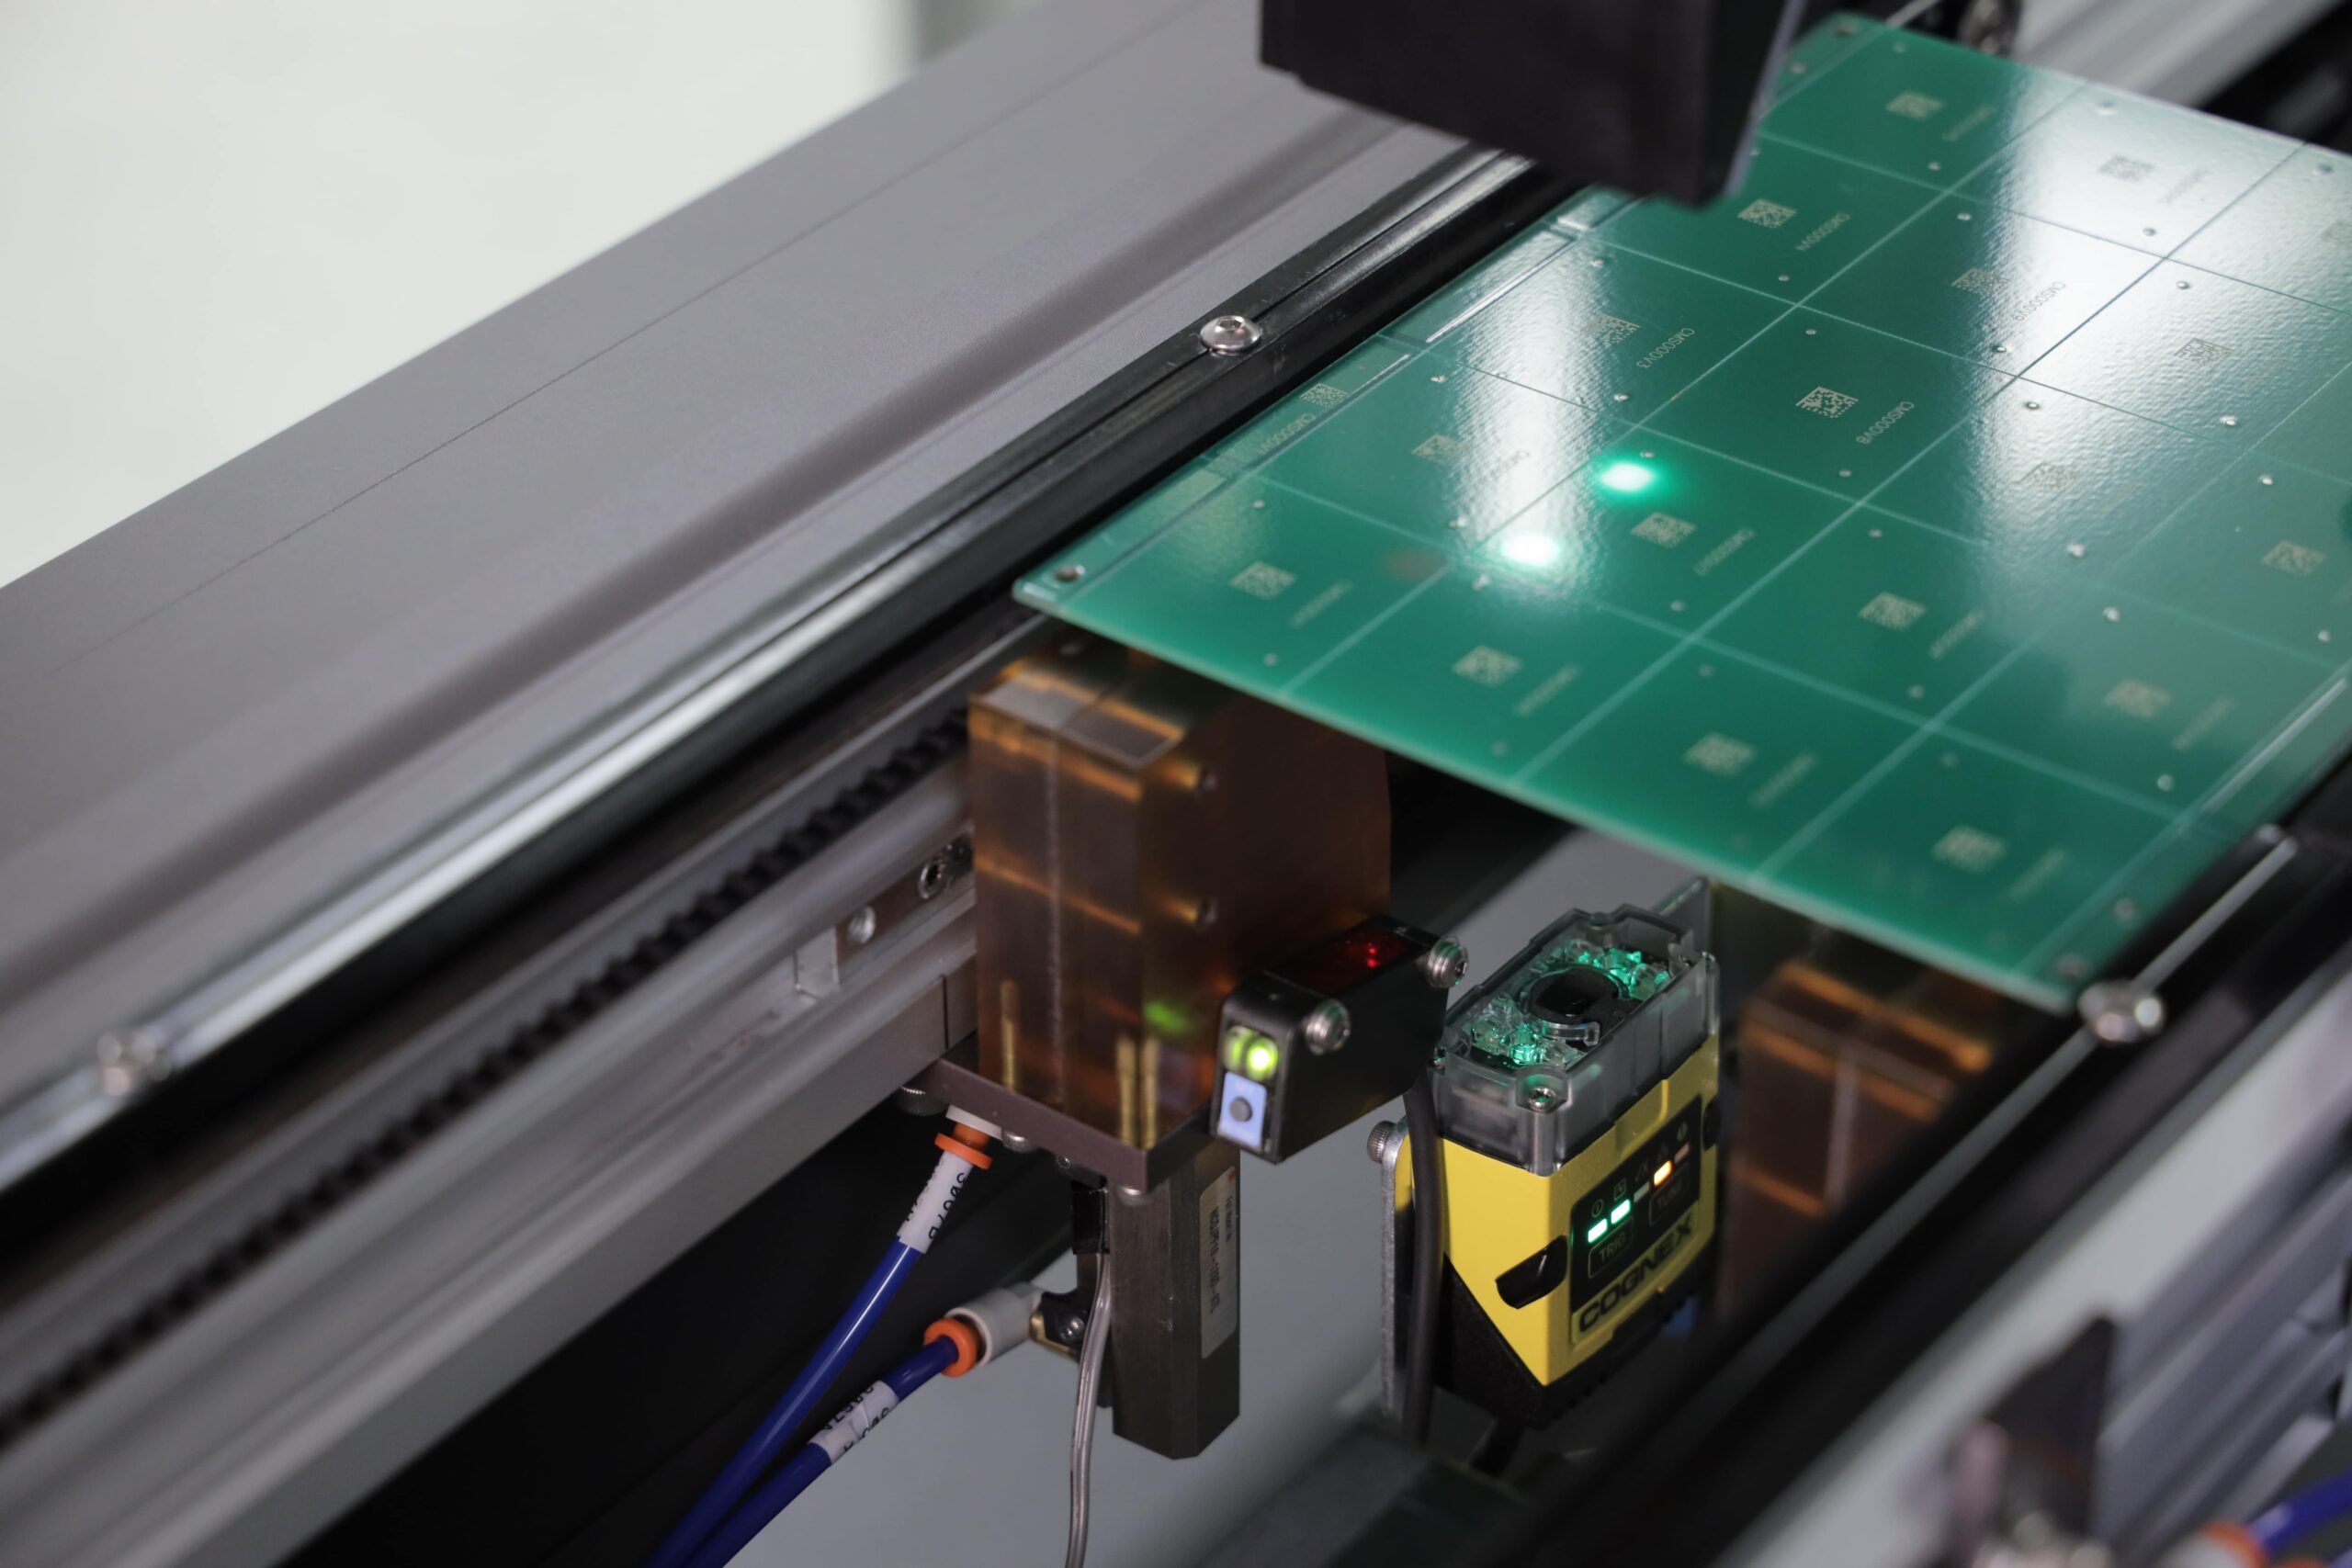 Laser marking system with barcode reader under PCB